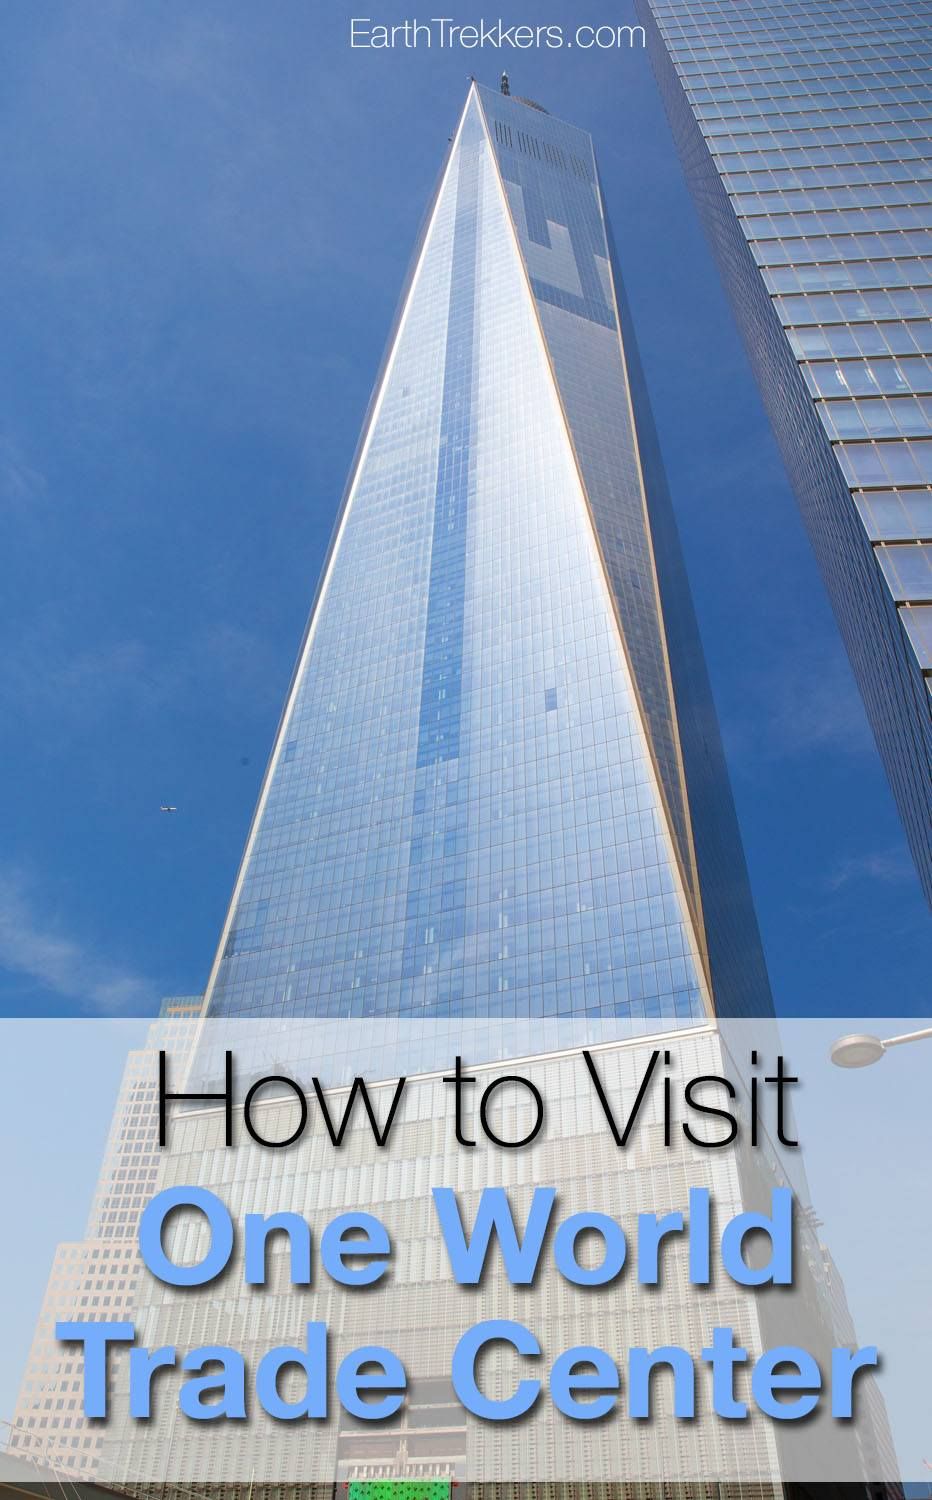 How to Visit One World Trade Center